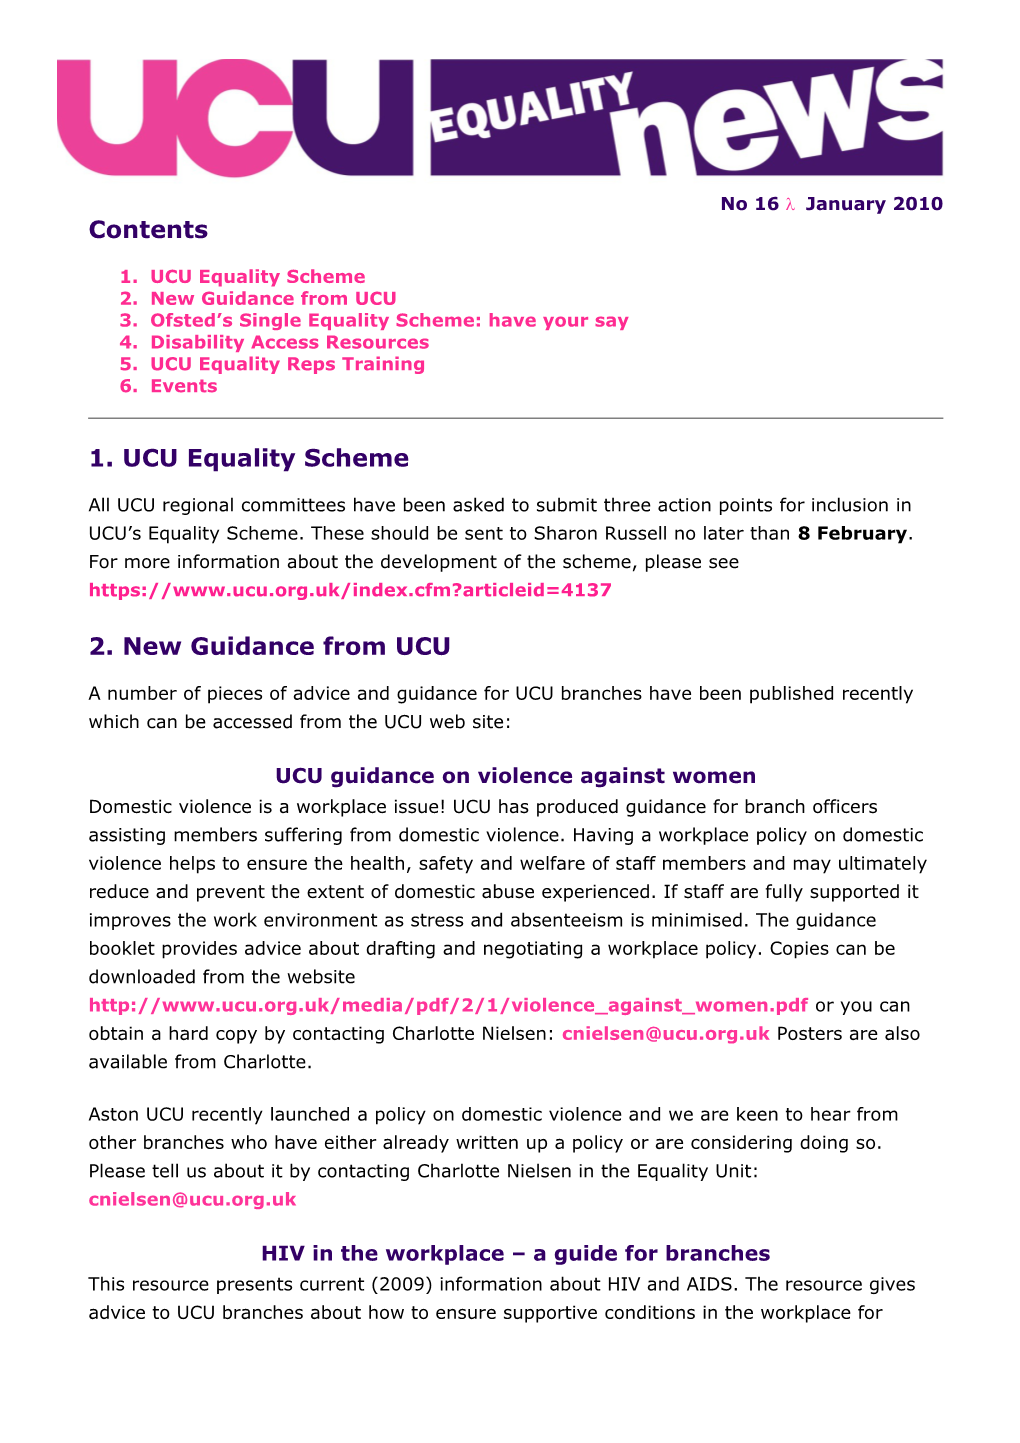 3. Ofsted S Single Equality Scheme: Have Your Say